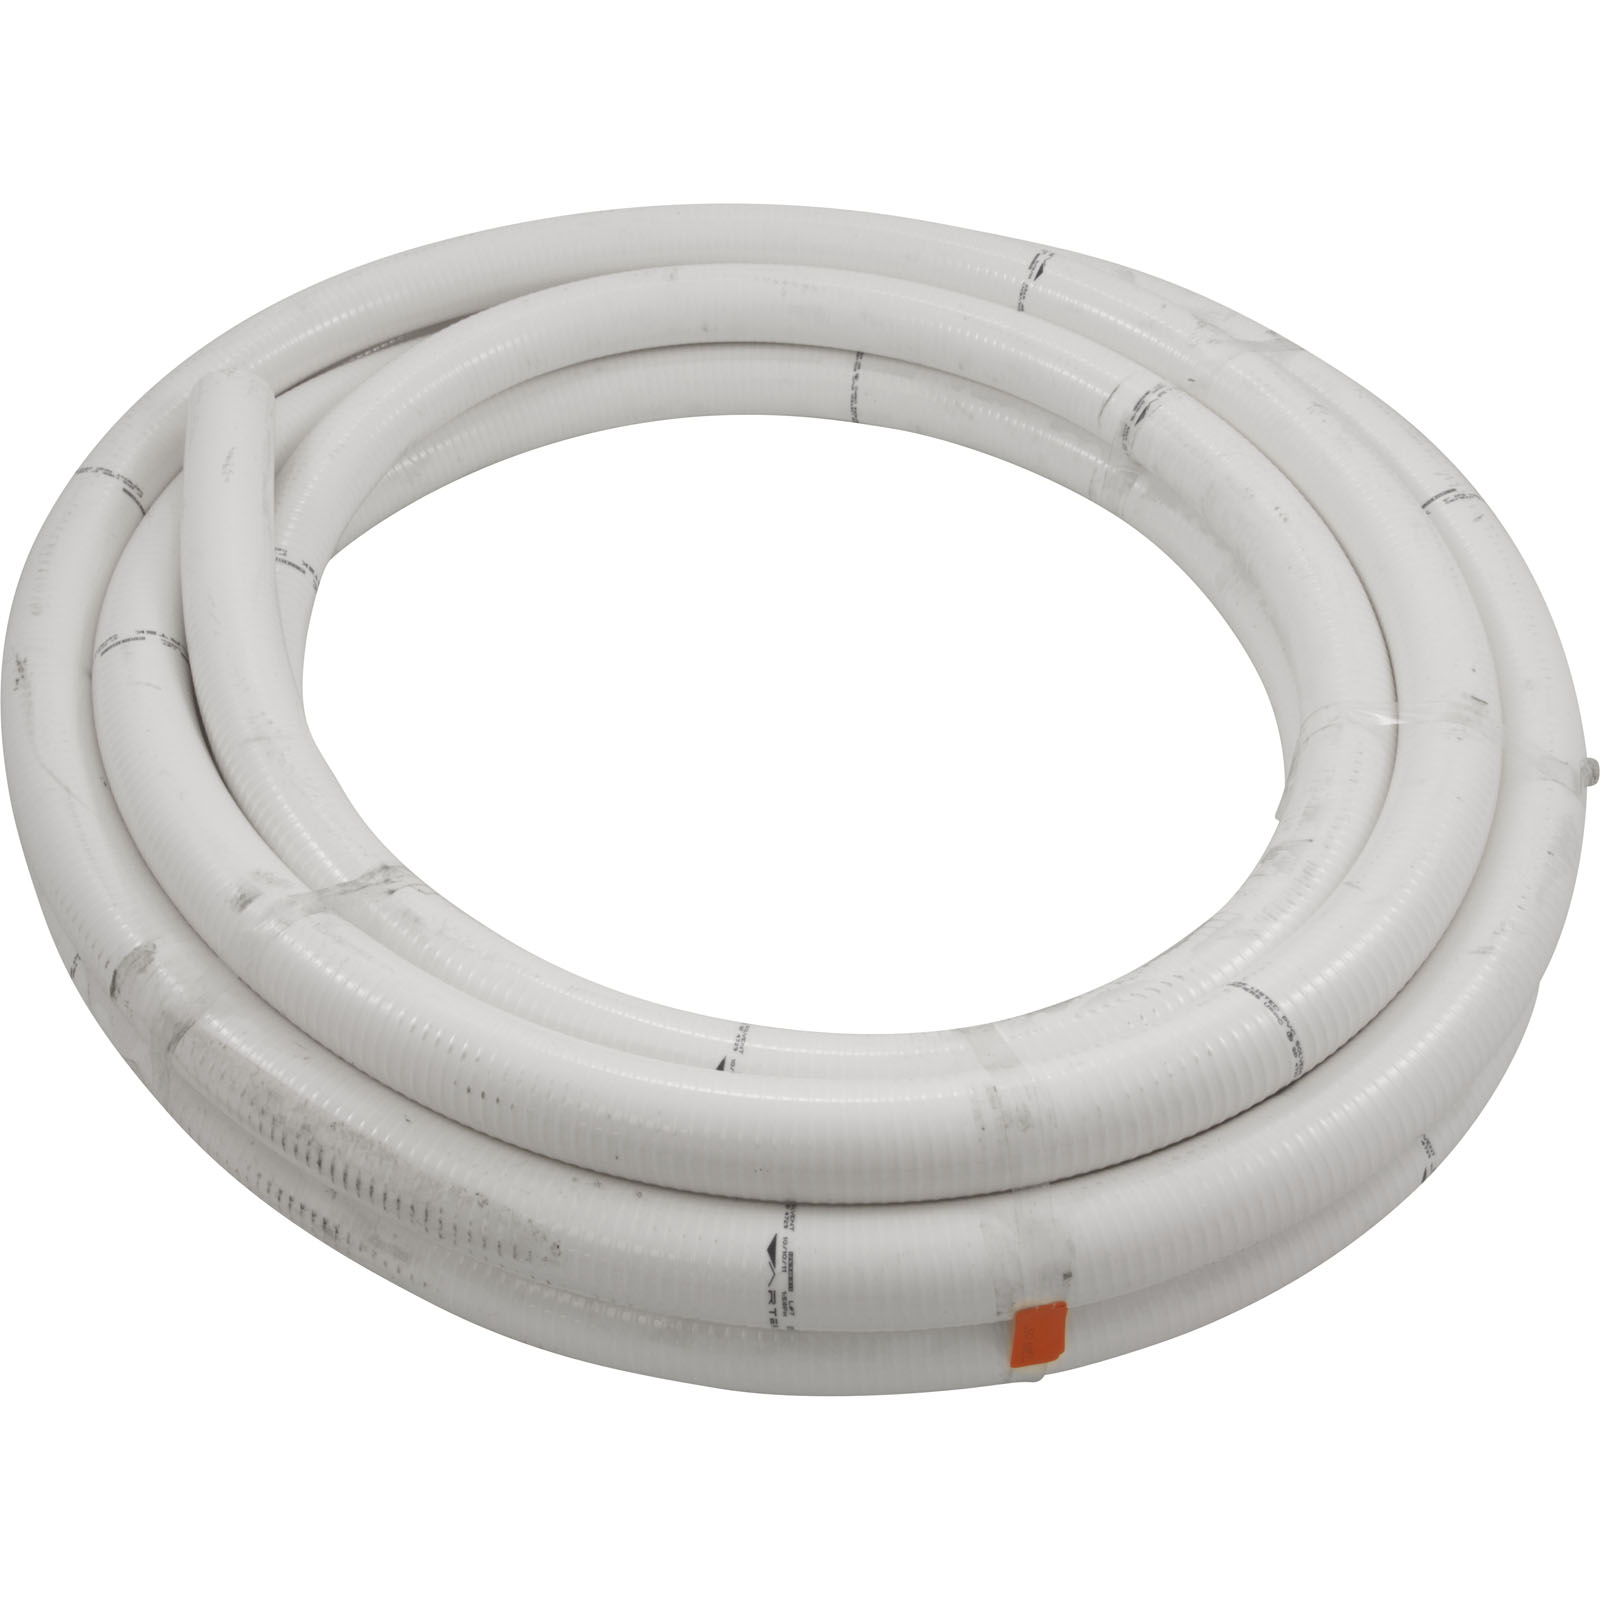 Picture of 22020-050-000 Flexible PVC Pipe CMP 2" x 50 Feet